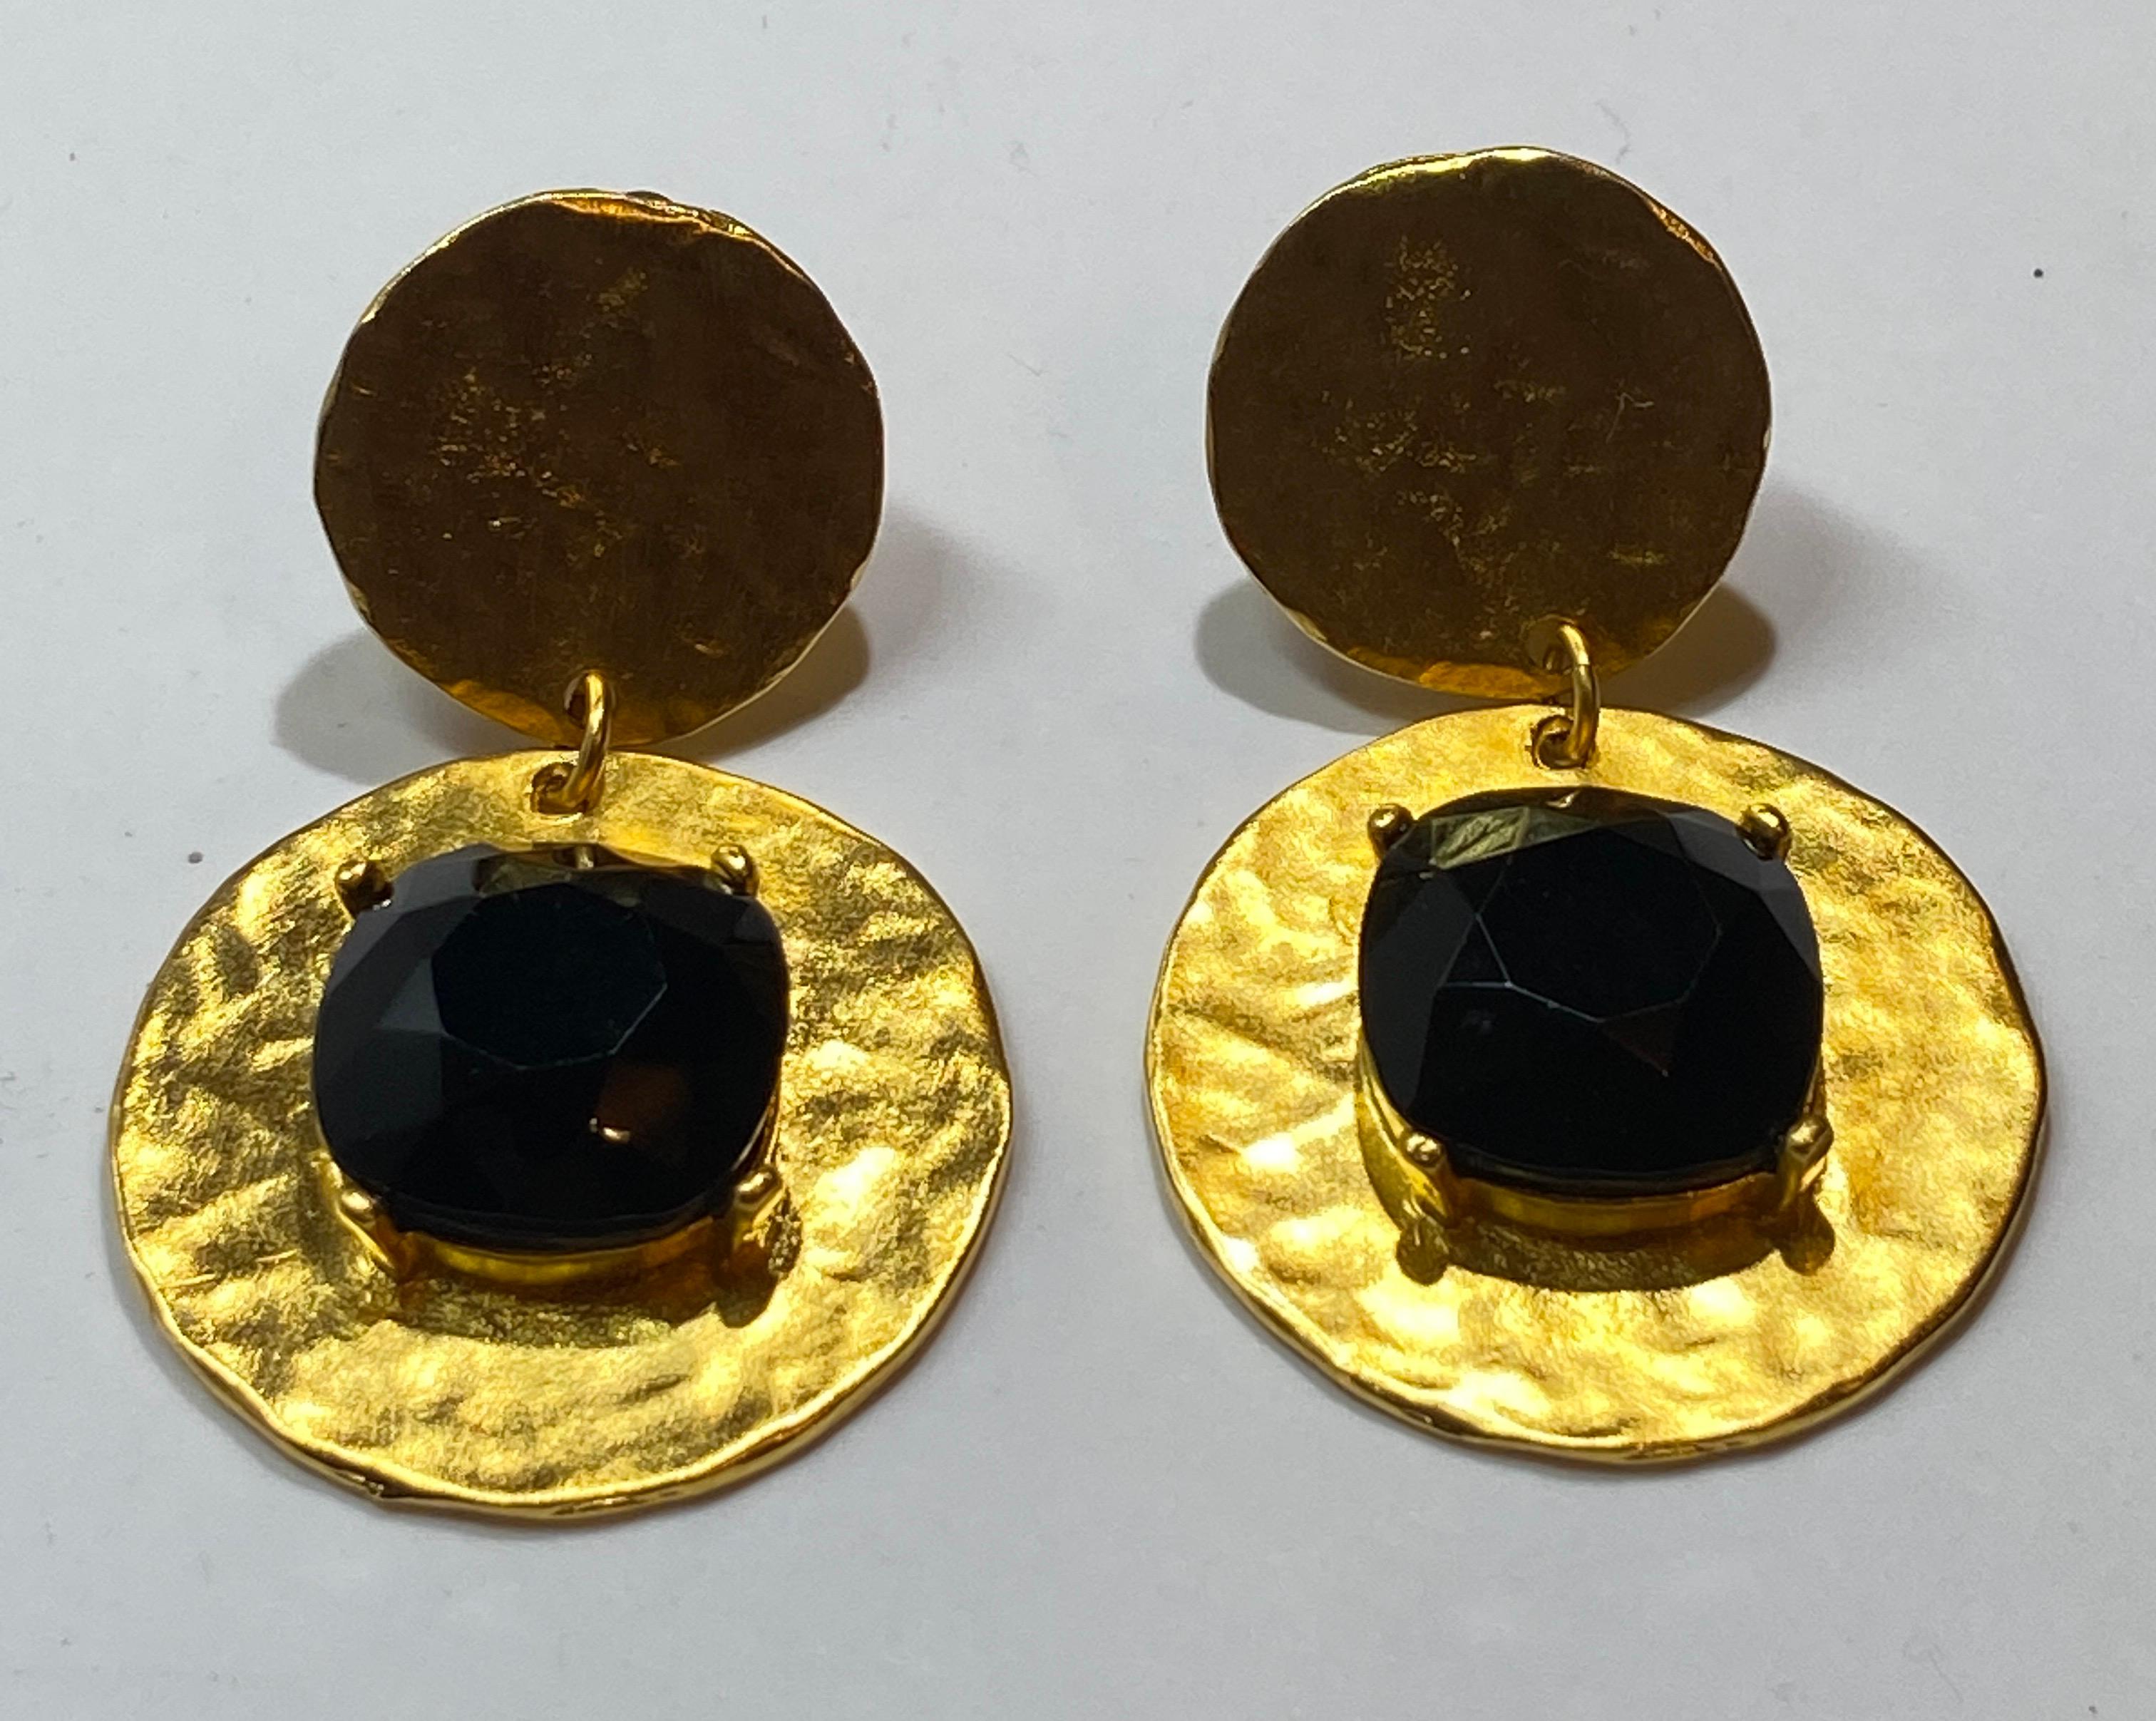 Kenneth Jay Lane's wonderfully elegant polished gilded gold hardware accented with a black lucite center clip-on earrings measures 2 1/2 inches in length. The width measures 1 inch and 1 1/2 inches. Designer's signature name is etched on the